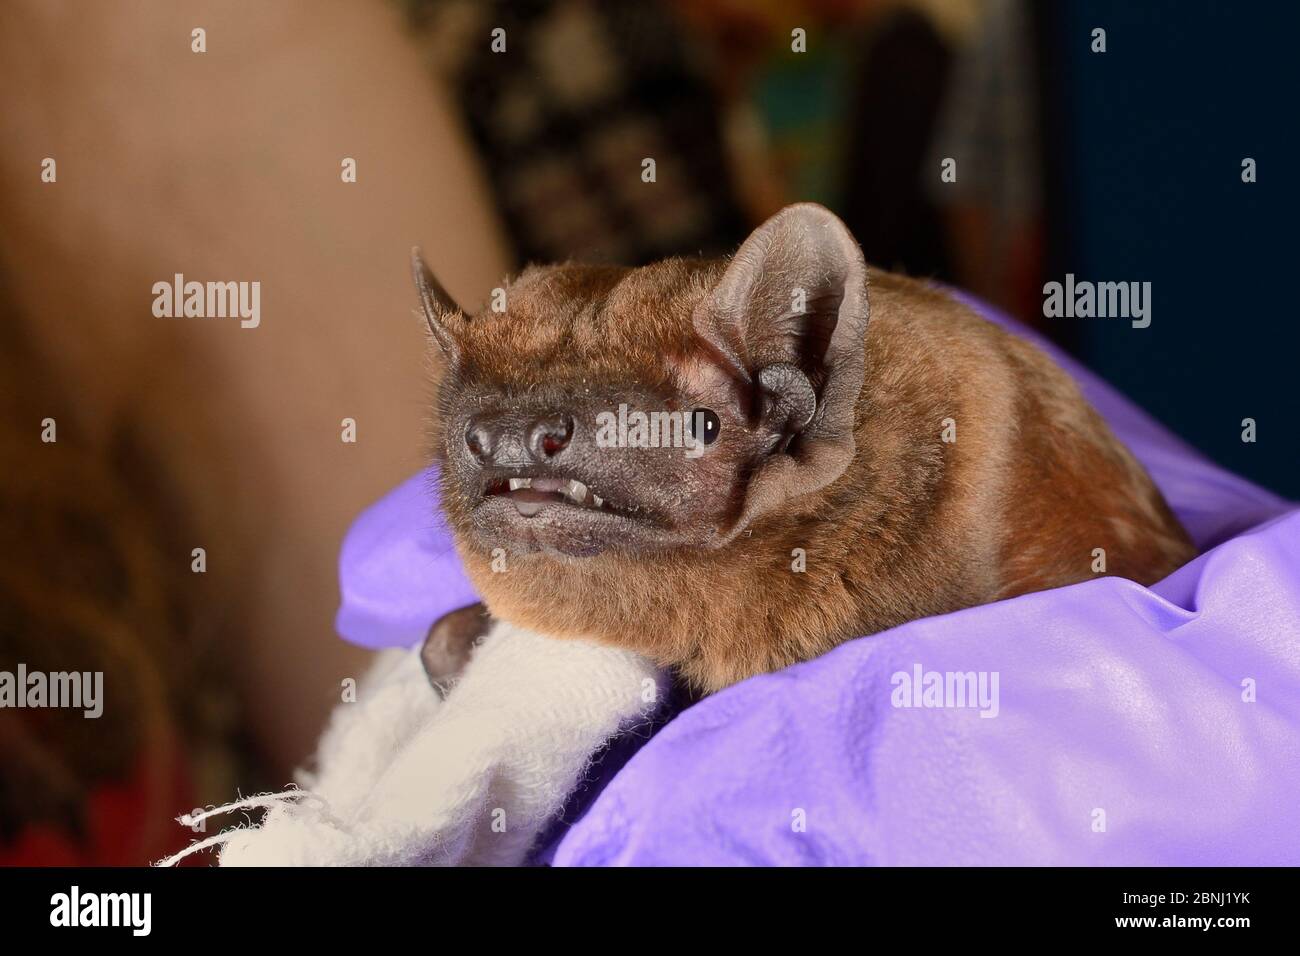 Noctule bat (Nyctalus noctula) held up at a public outreach event by Samantha Pickering, Boscastle, Cornwall, UK, October.  Model released. Stock Photo